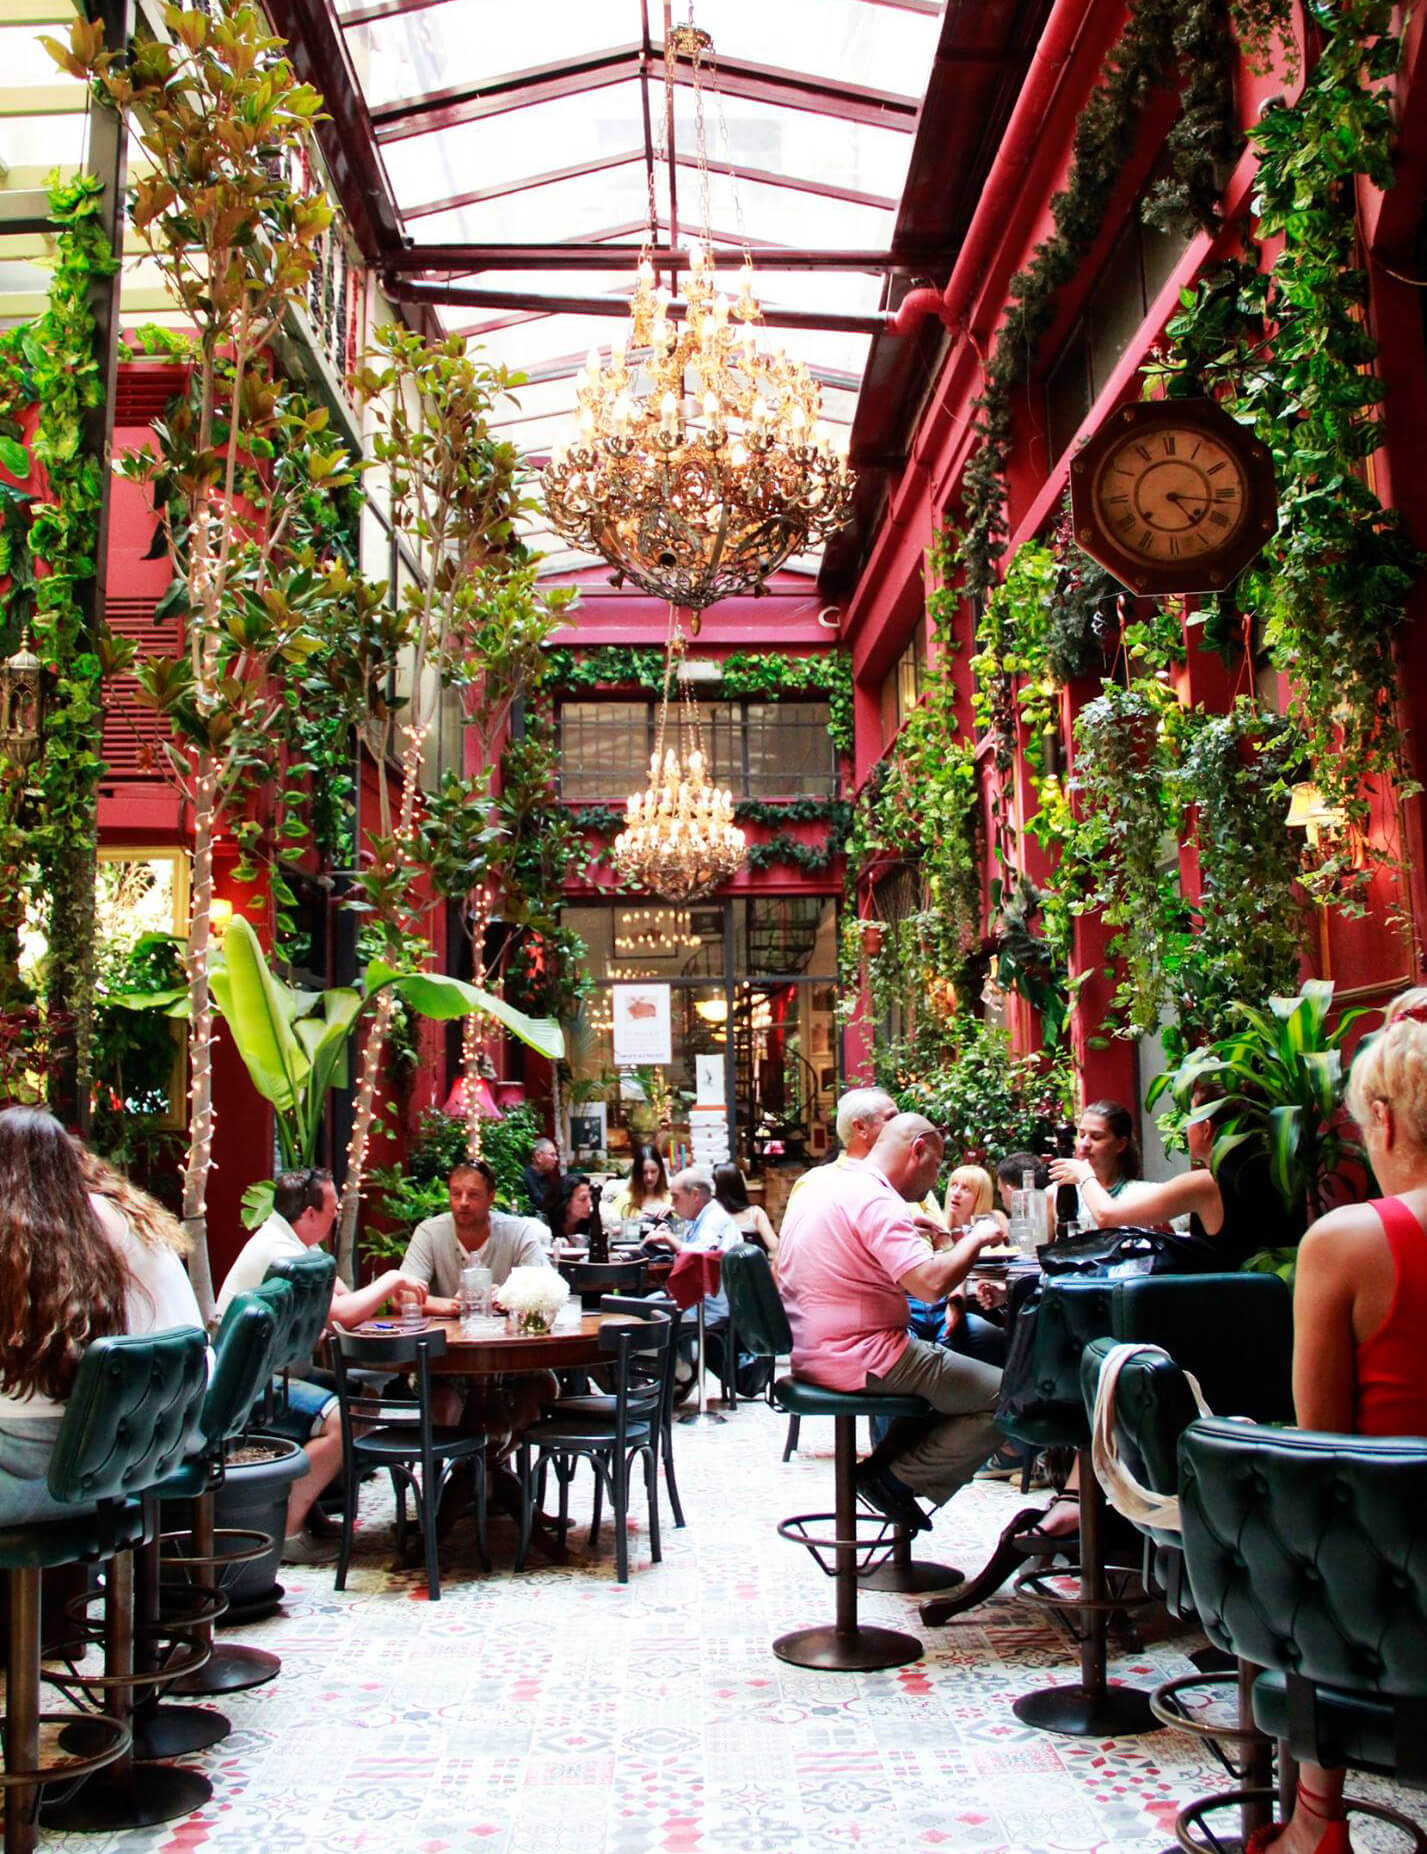 Could this be one of the most beautiful bars in Athens? We think so. | Courtesy: Noel 